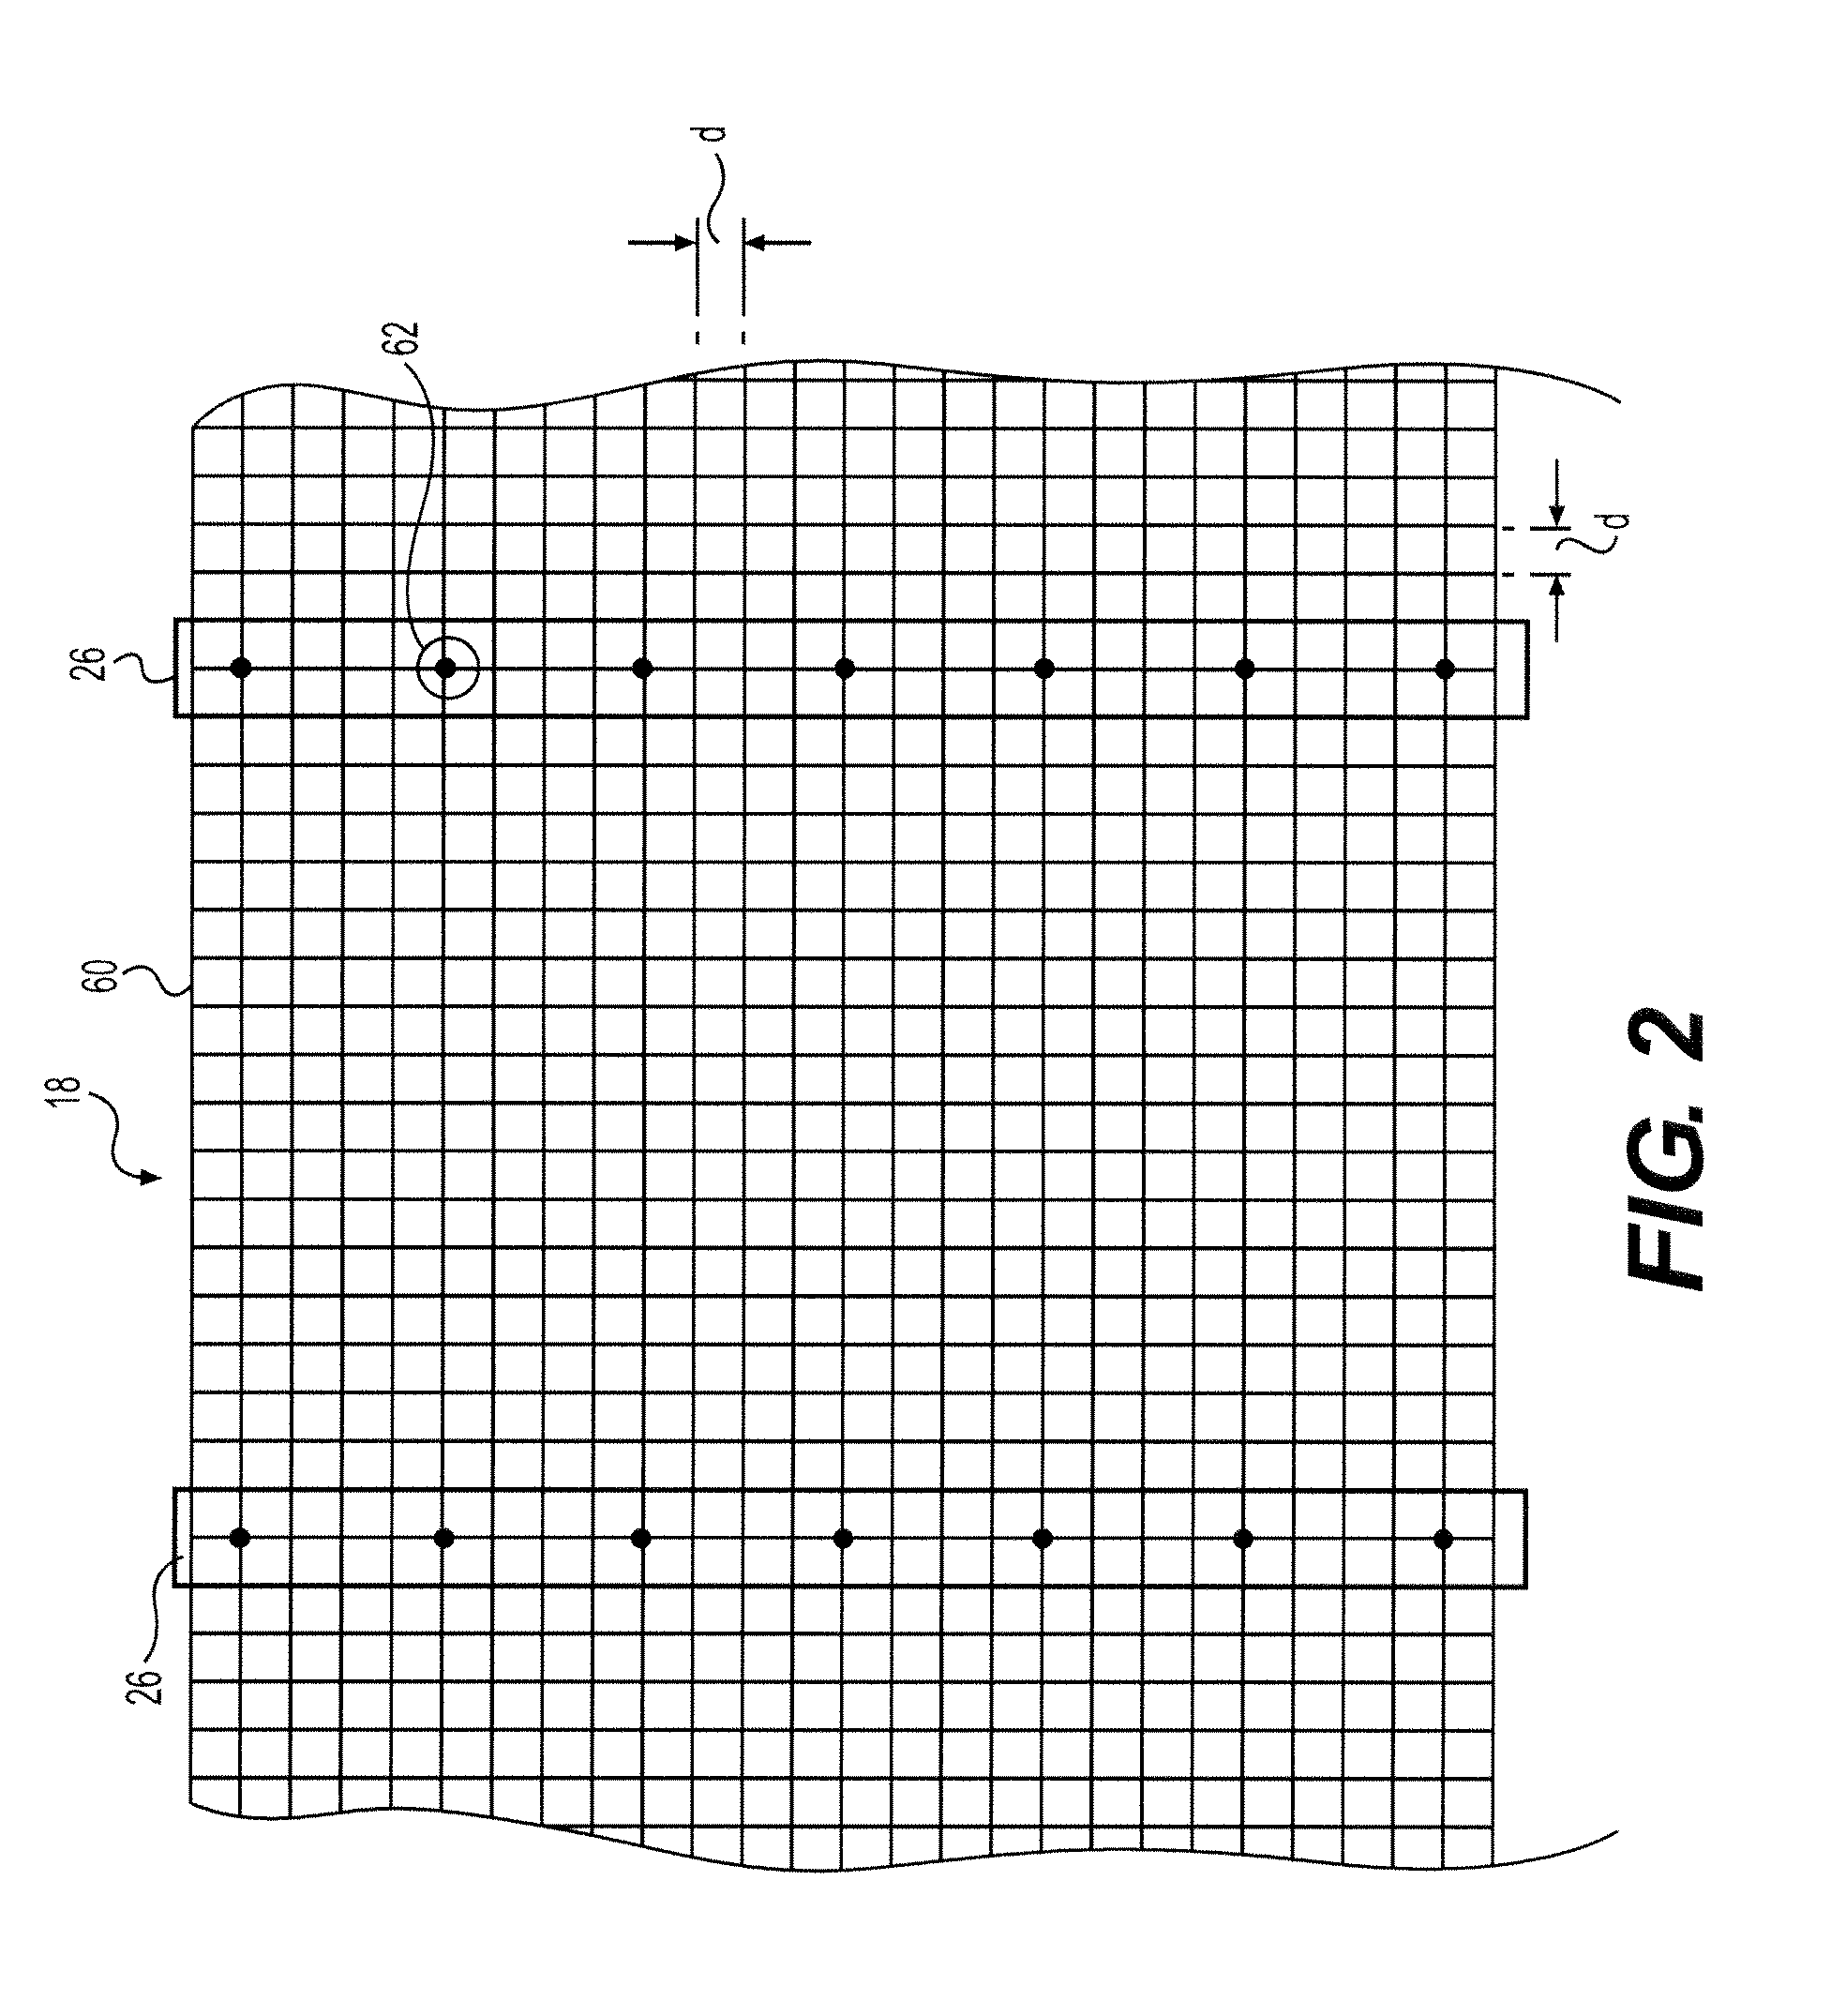 Apparatus for extending and retracting an armor system for defeating high energy projectiles